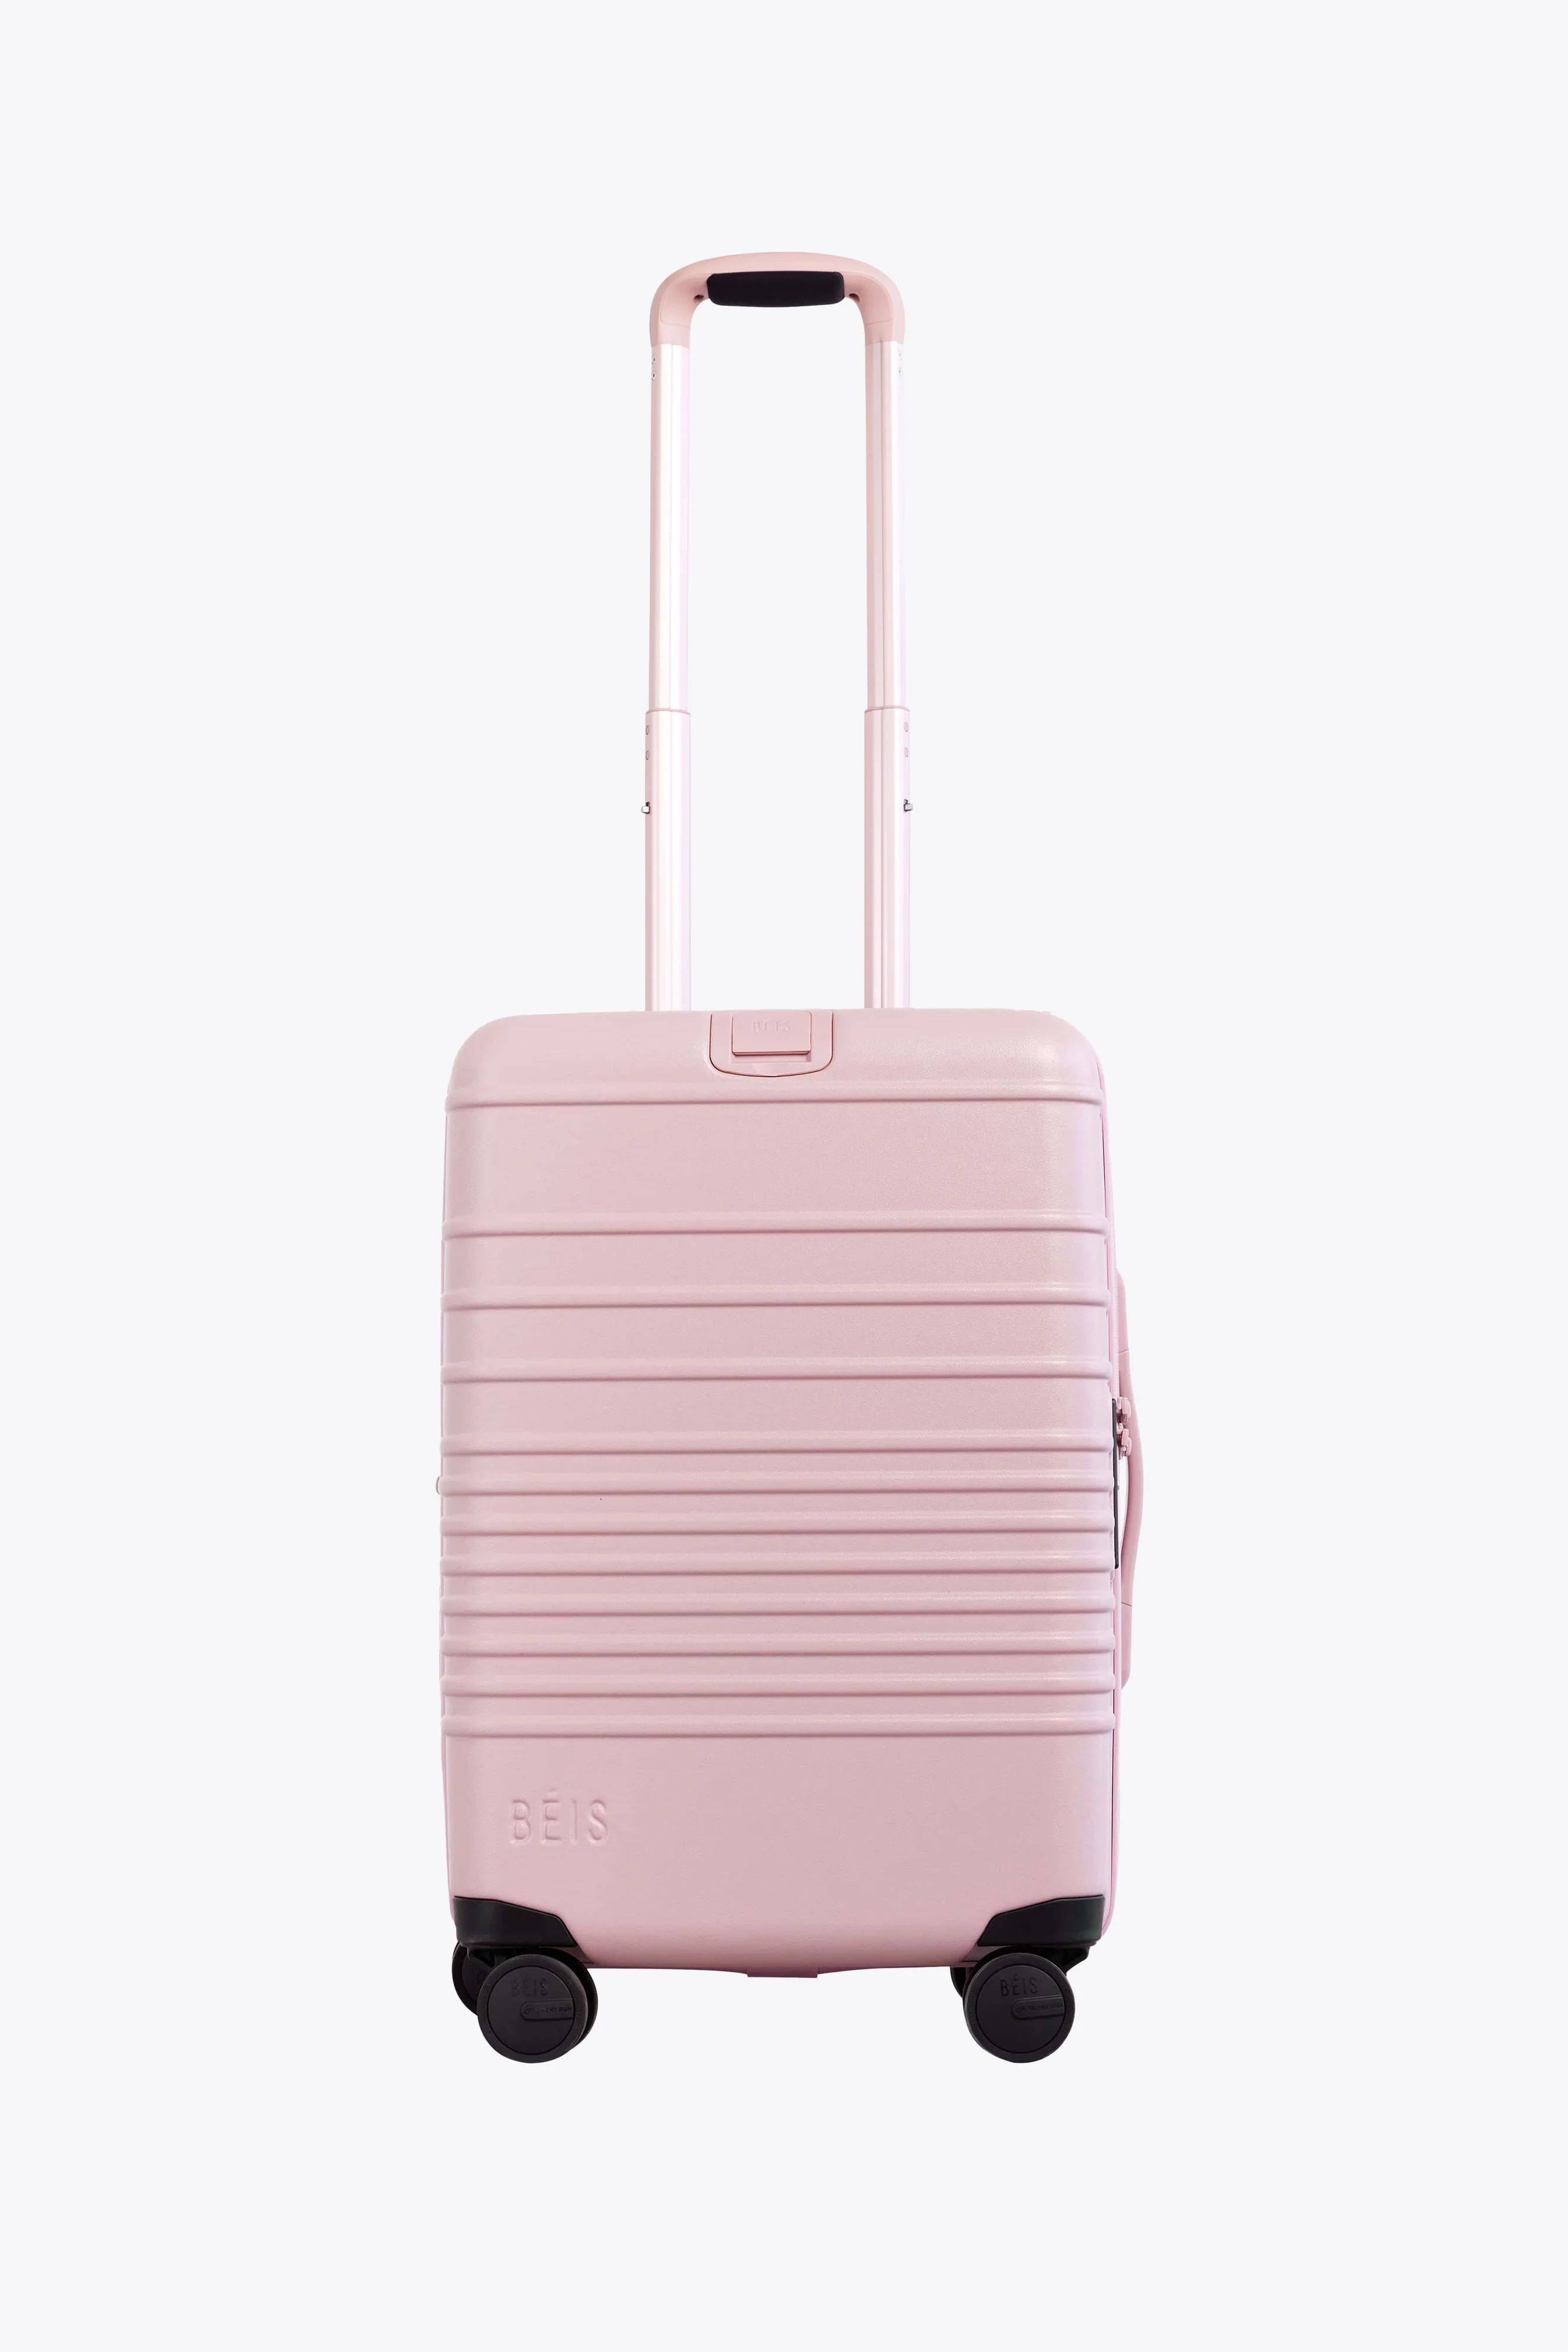 BÉIS 'The Carry-On Roller' in Atlas Pink - Pink Carry On Suitcase & Hard Shell Luggage | BÉIS Travel